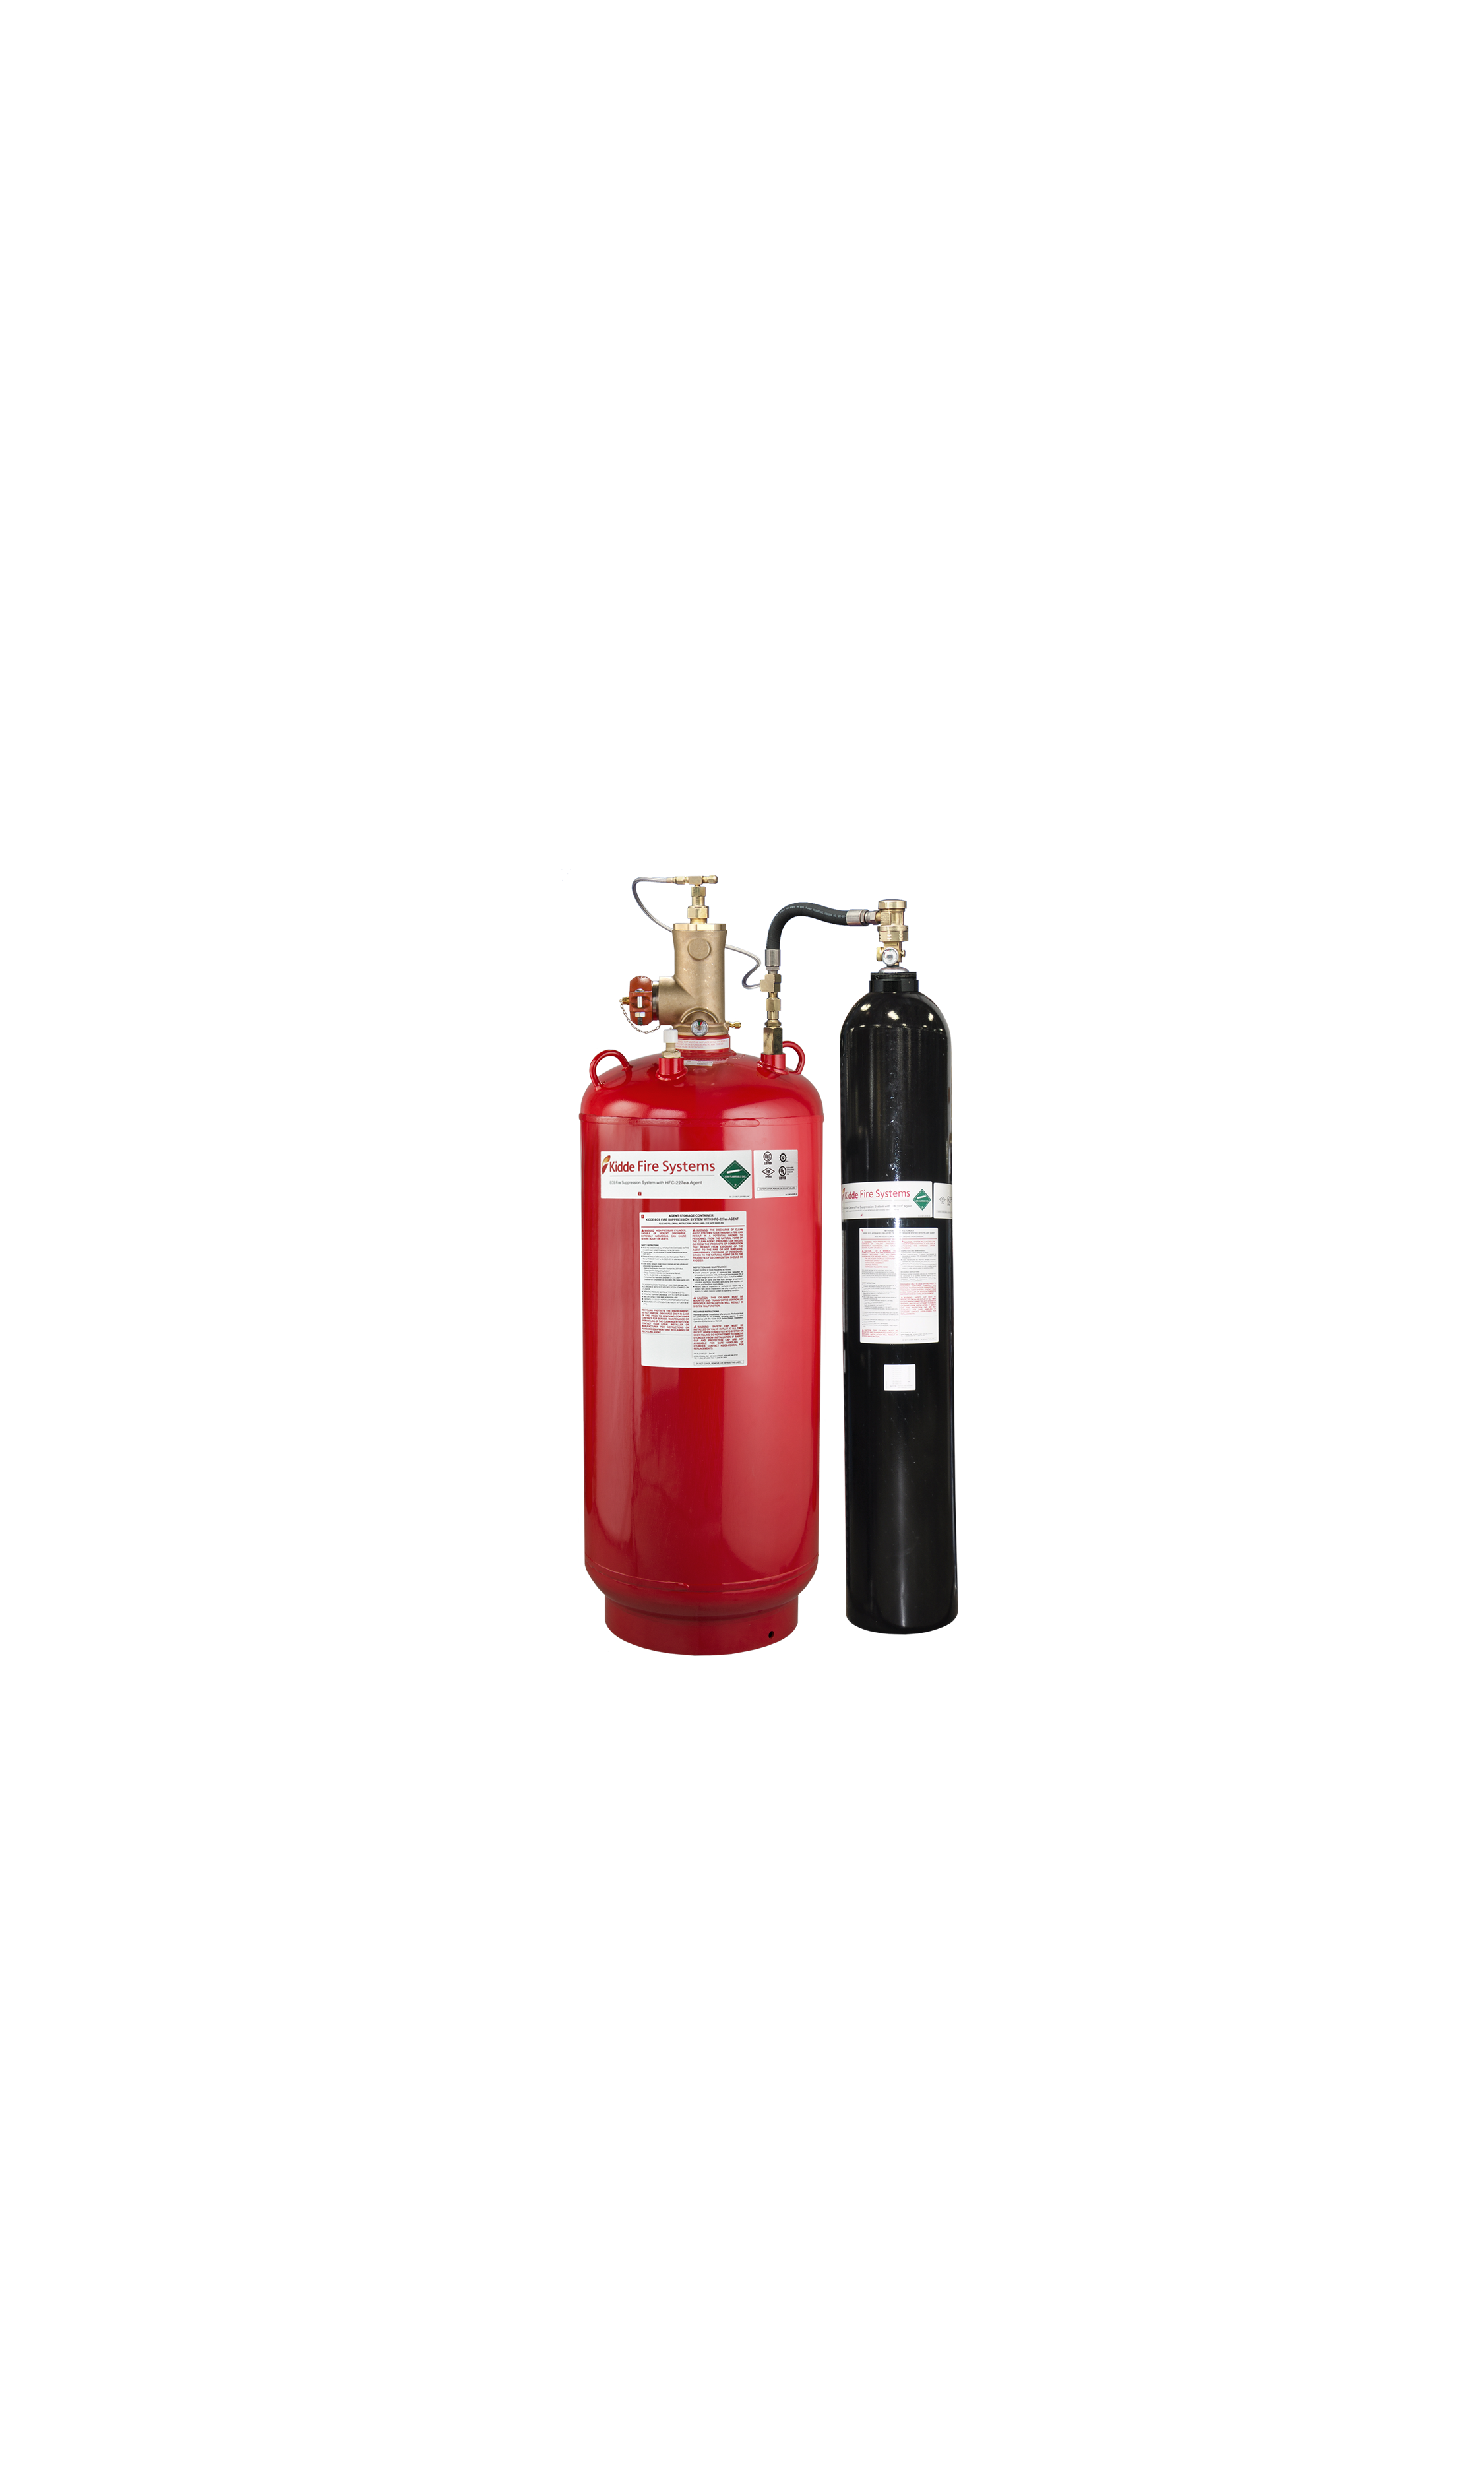 kidde-ads-clean-agent-fire-suppression-system-orr-protection-systems